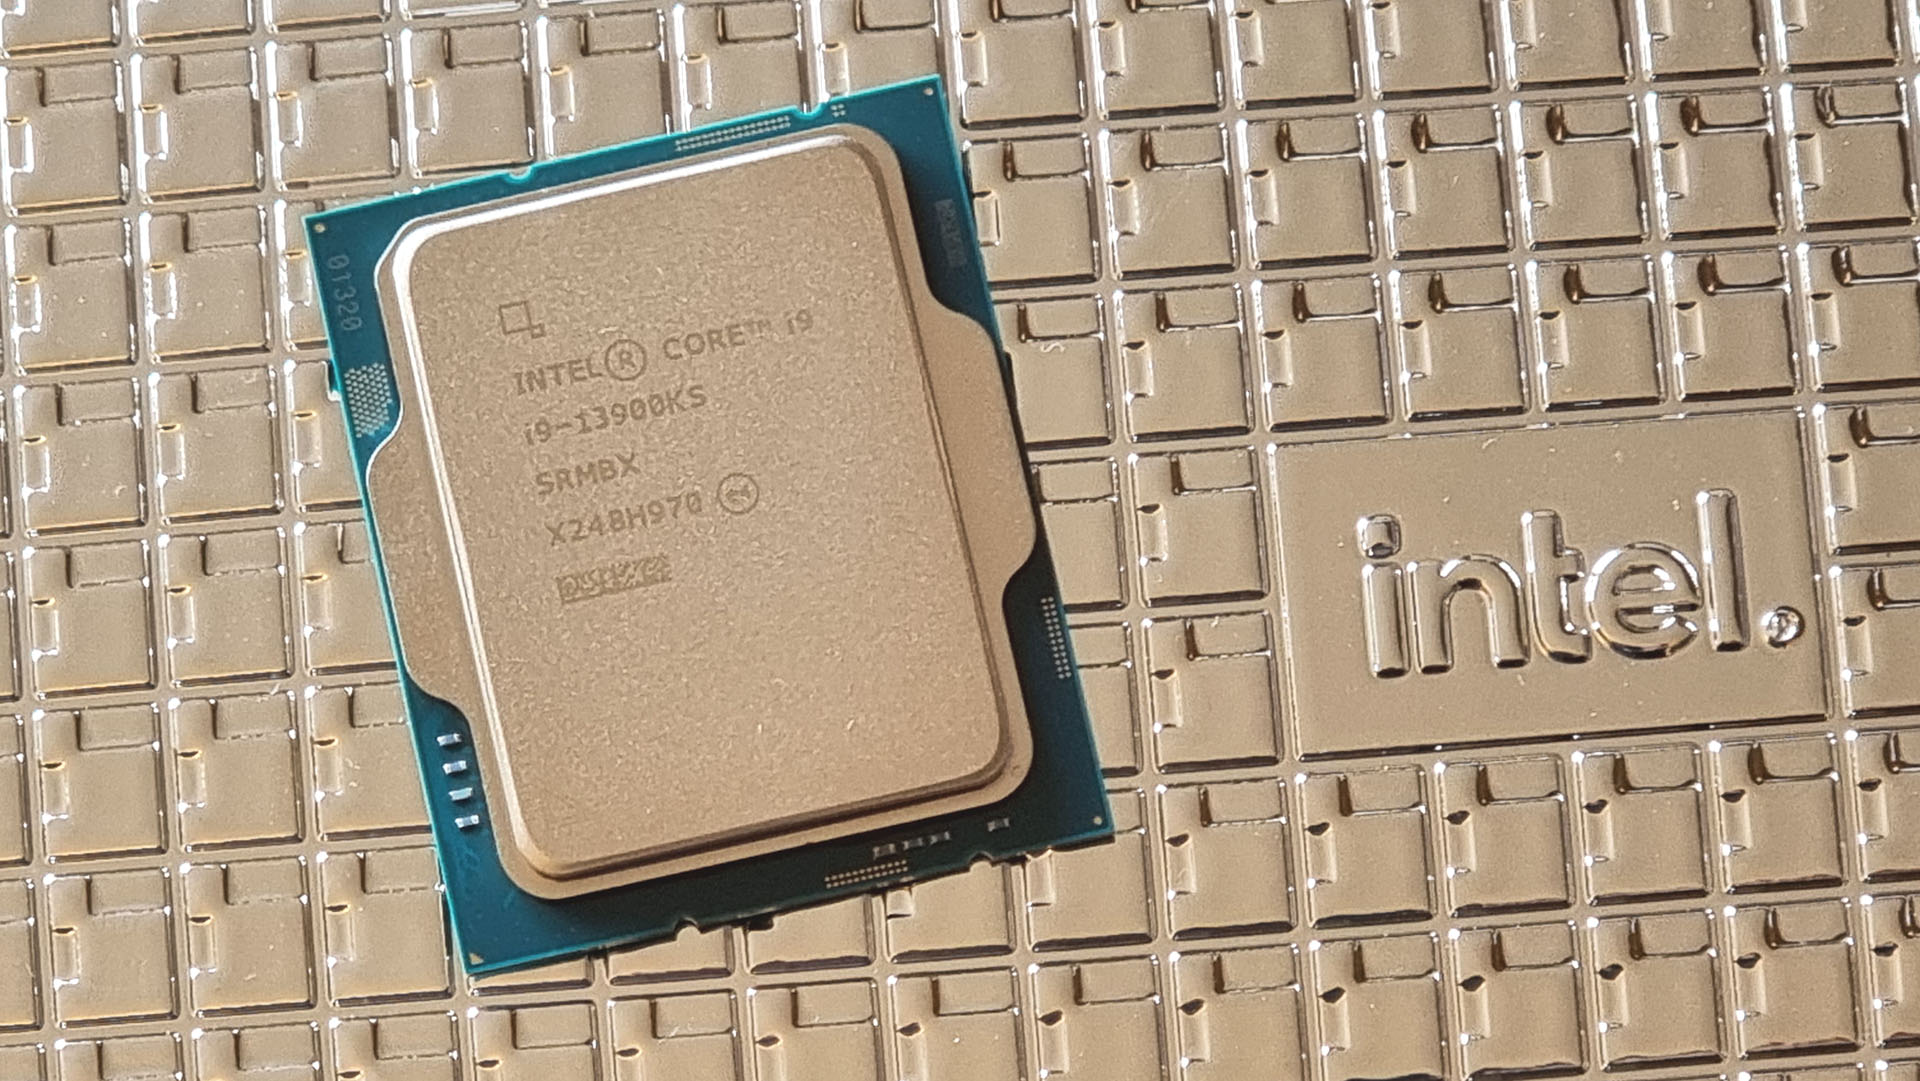 Intel Core i9-13900K Reviews, Pros and Cons